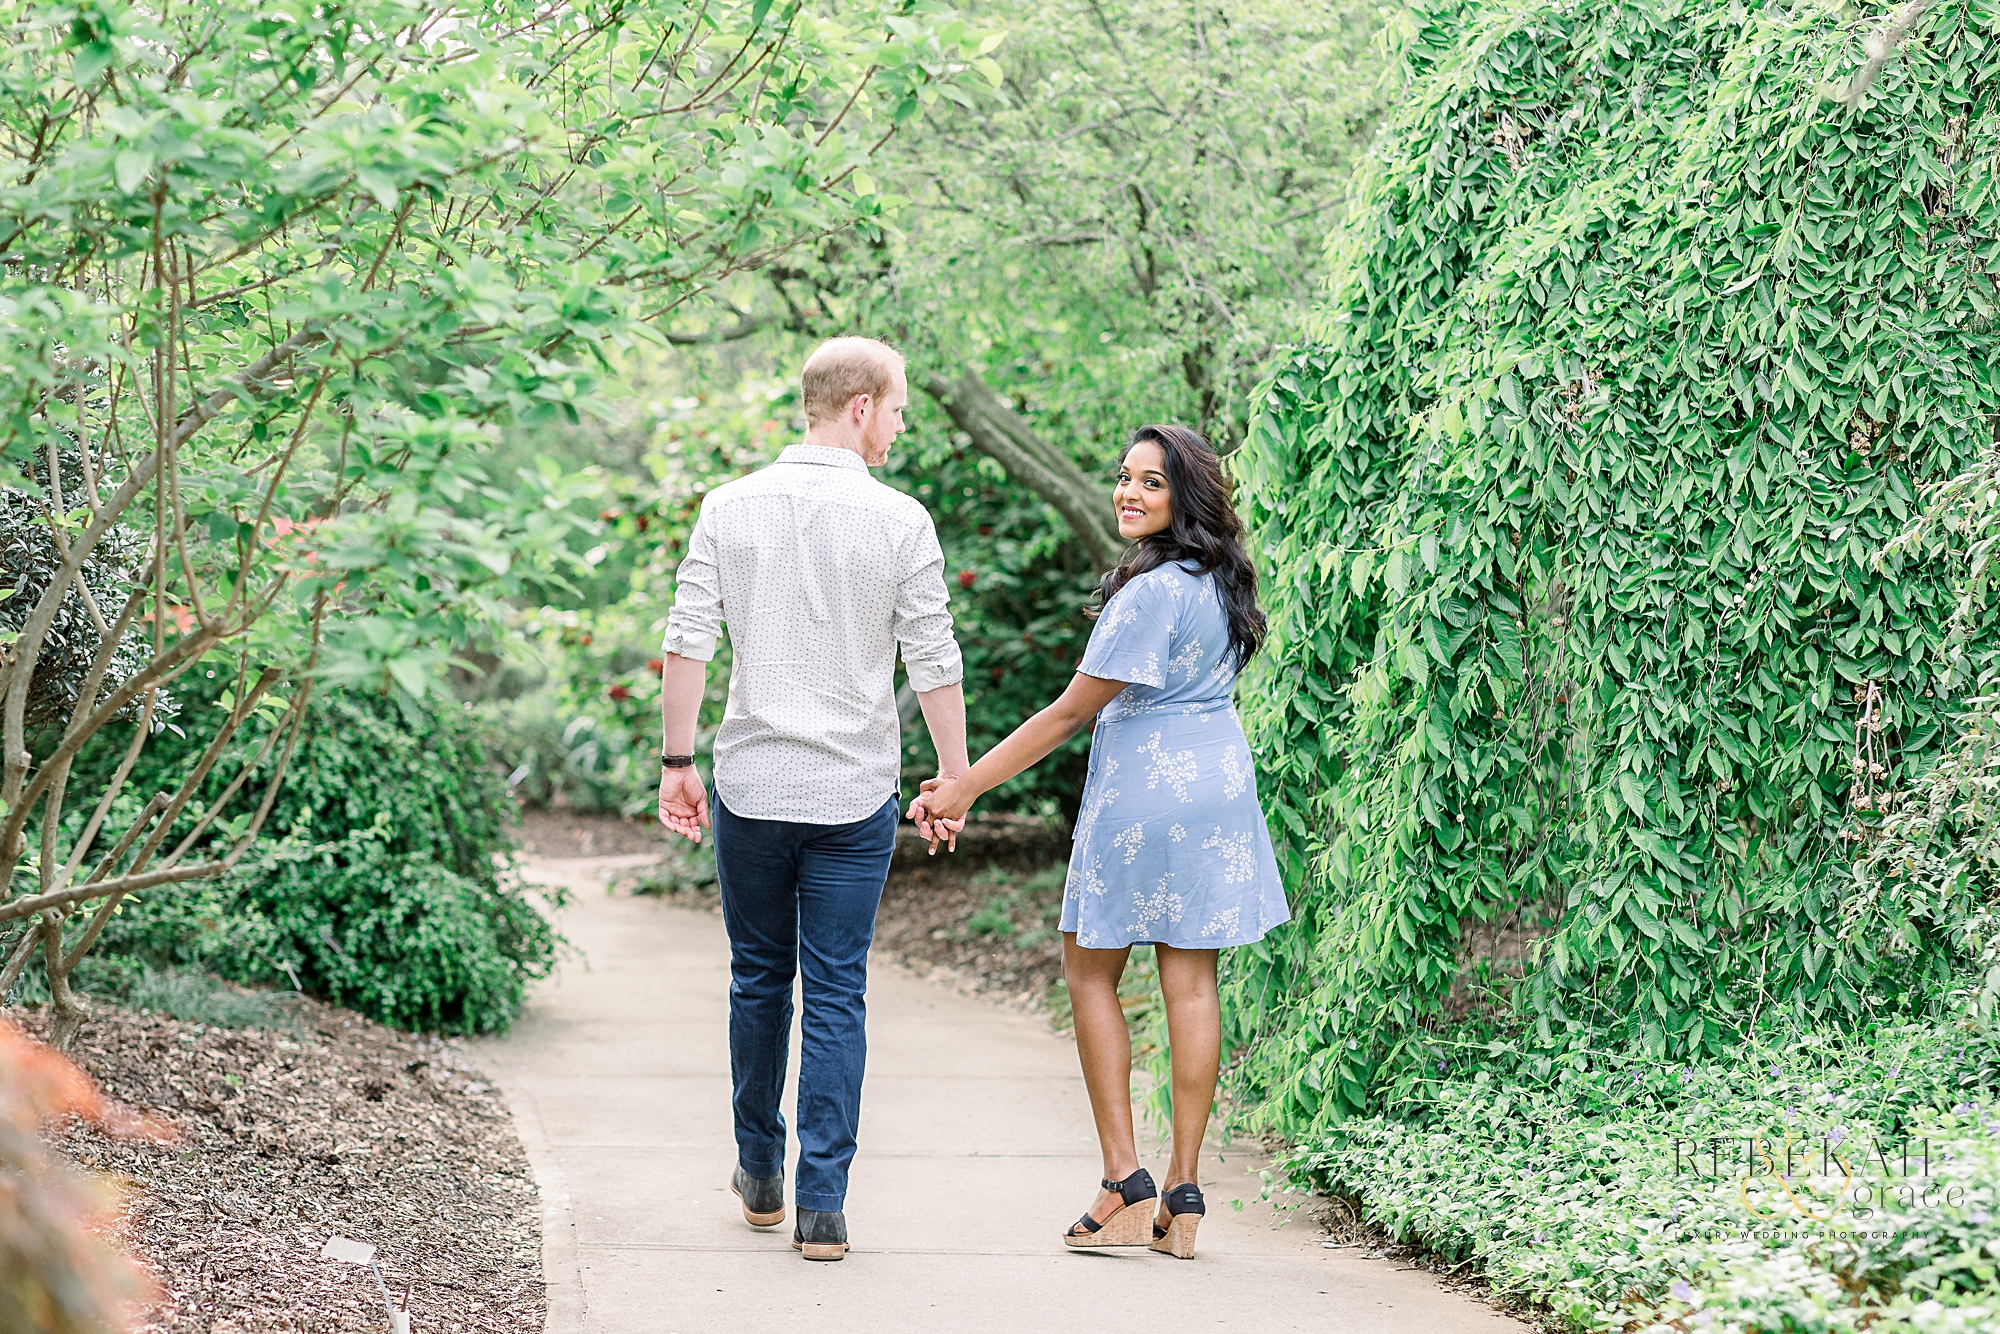 Custom gold engagement ring. Raleigh engagement photography taken at the JC Raulston Arboretum and Downtown Raleigh North Carolina. Photography by Rebekah & Grace Photography.